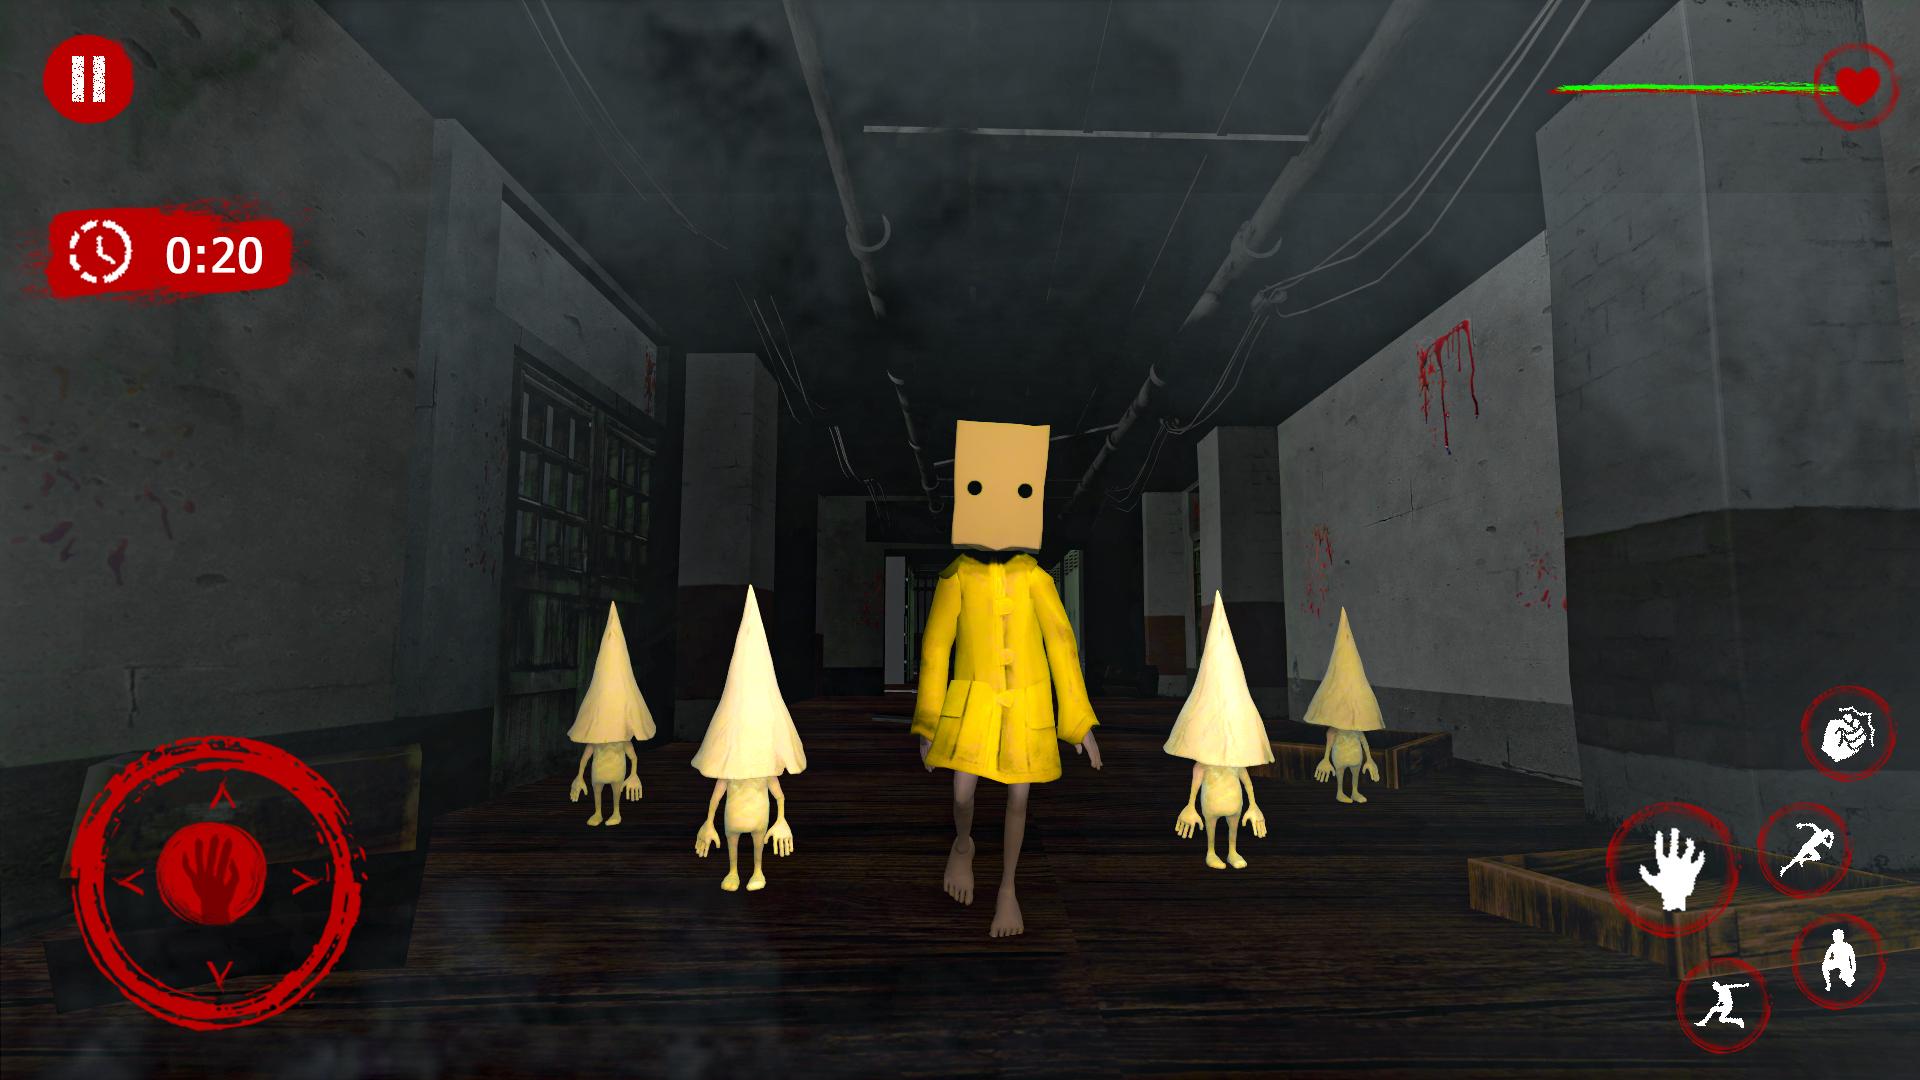 Little Scary Nightmares 2 - Haunted House Escape 0.1 Screenshot 11